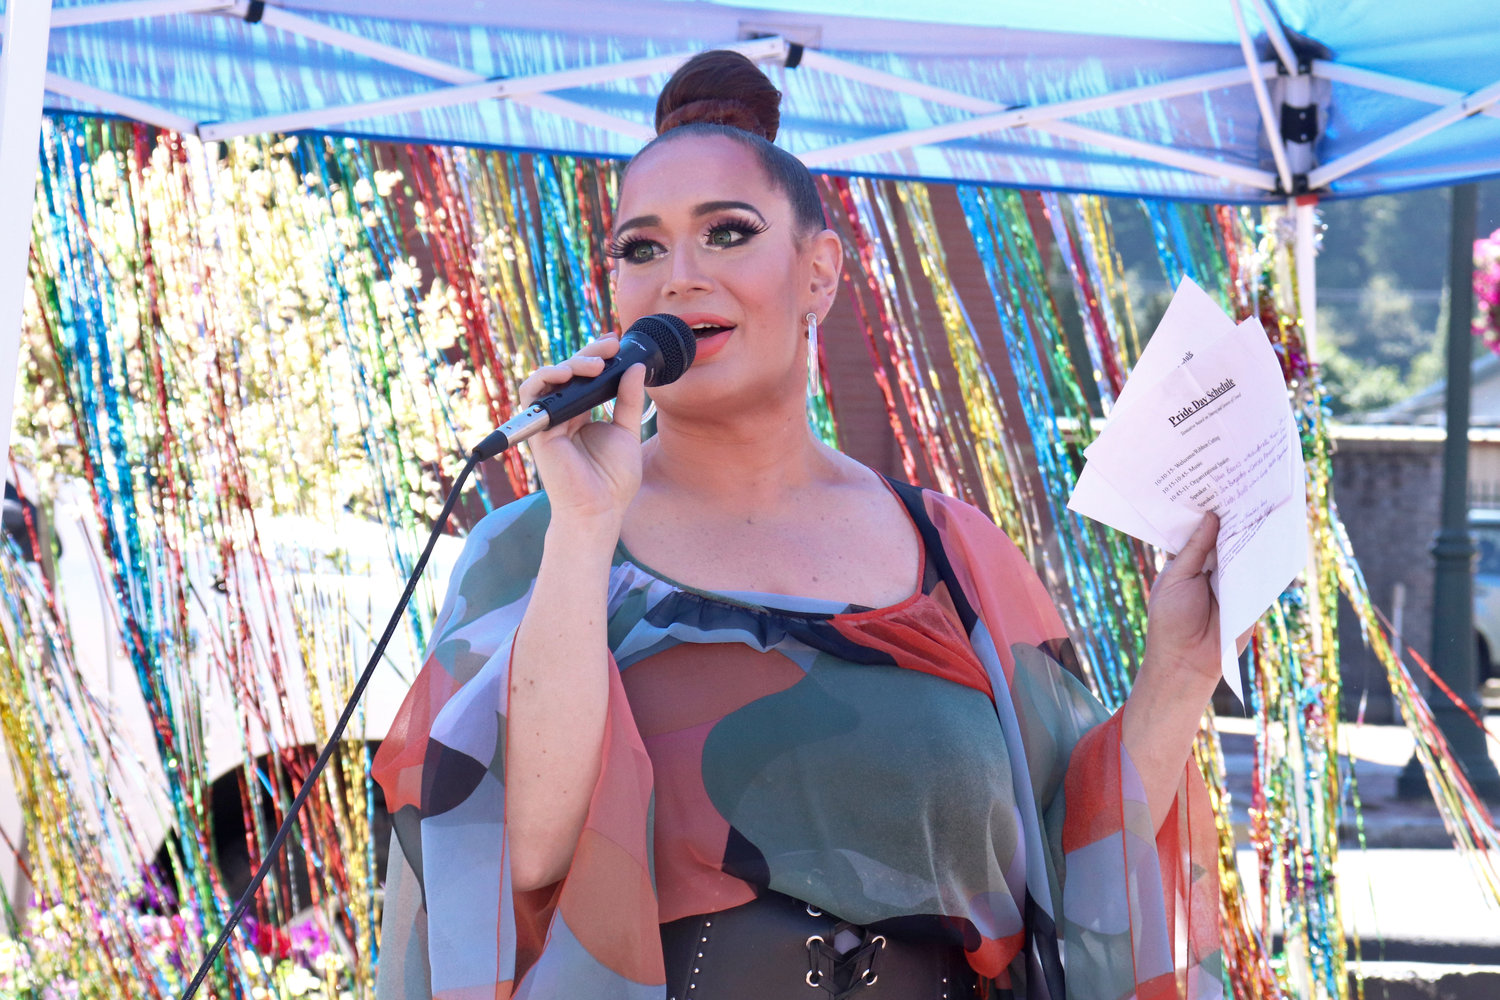 Sophia Sinclair emcees the entertainment lineup at Lewis County Pride in Centralia on Saturday.